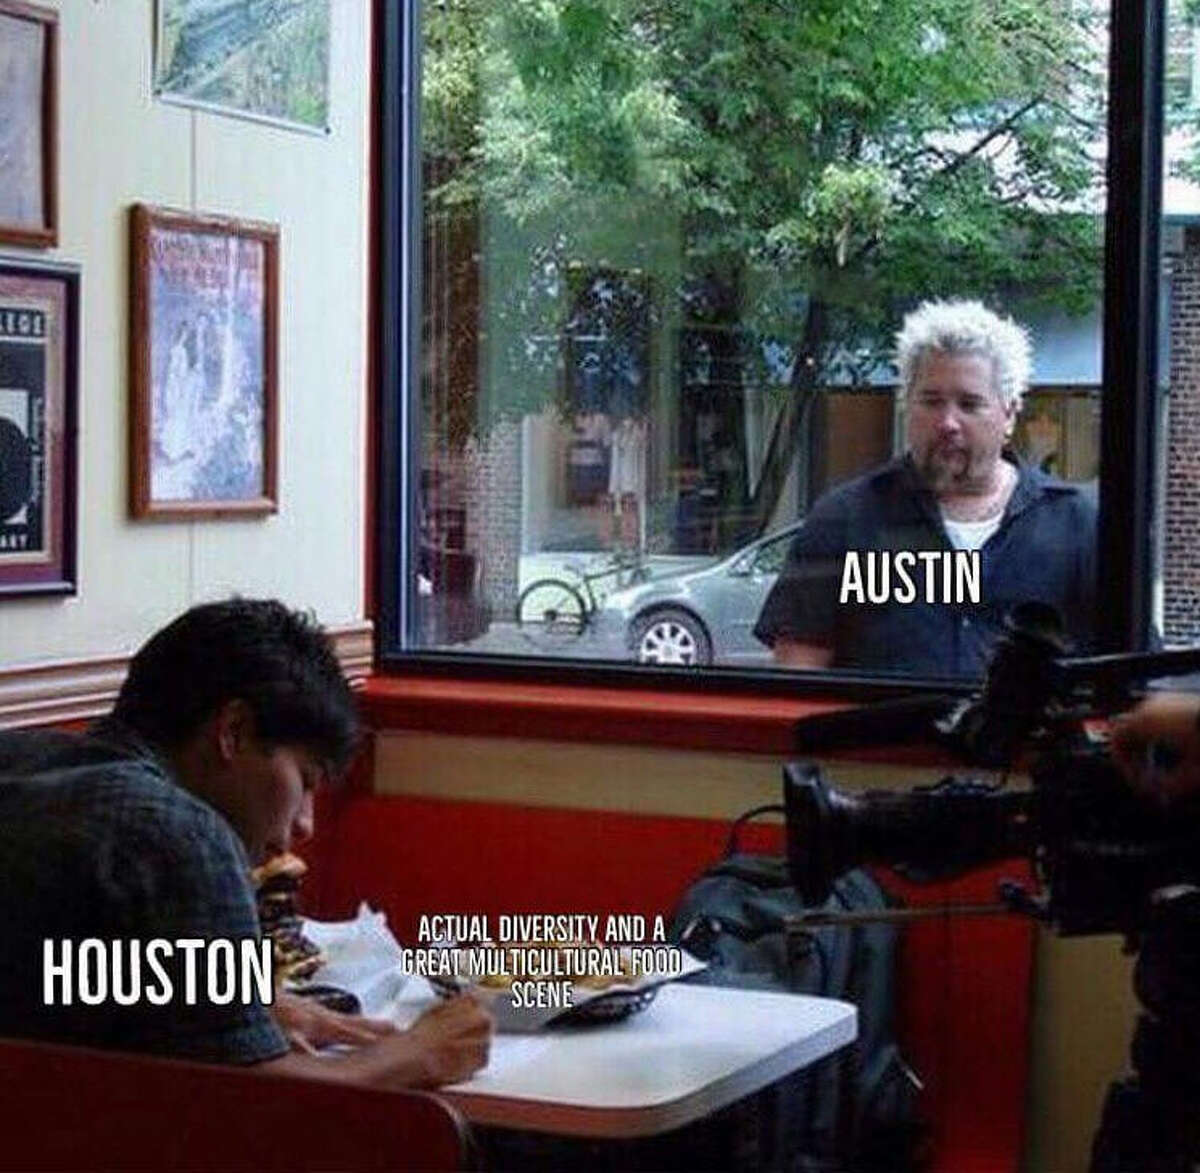 HOUSTON VS. TEXAS: Memes perfectly describe how much Houstonians love Houston The differences in cultural diversity between Houston and Austin have been brought into the spotlight with this viral Guy Fieri meme. >> See other memes that show how much Houstonians love the Bayou City.